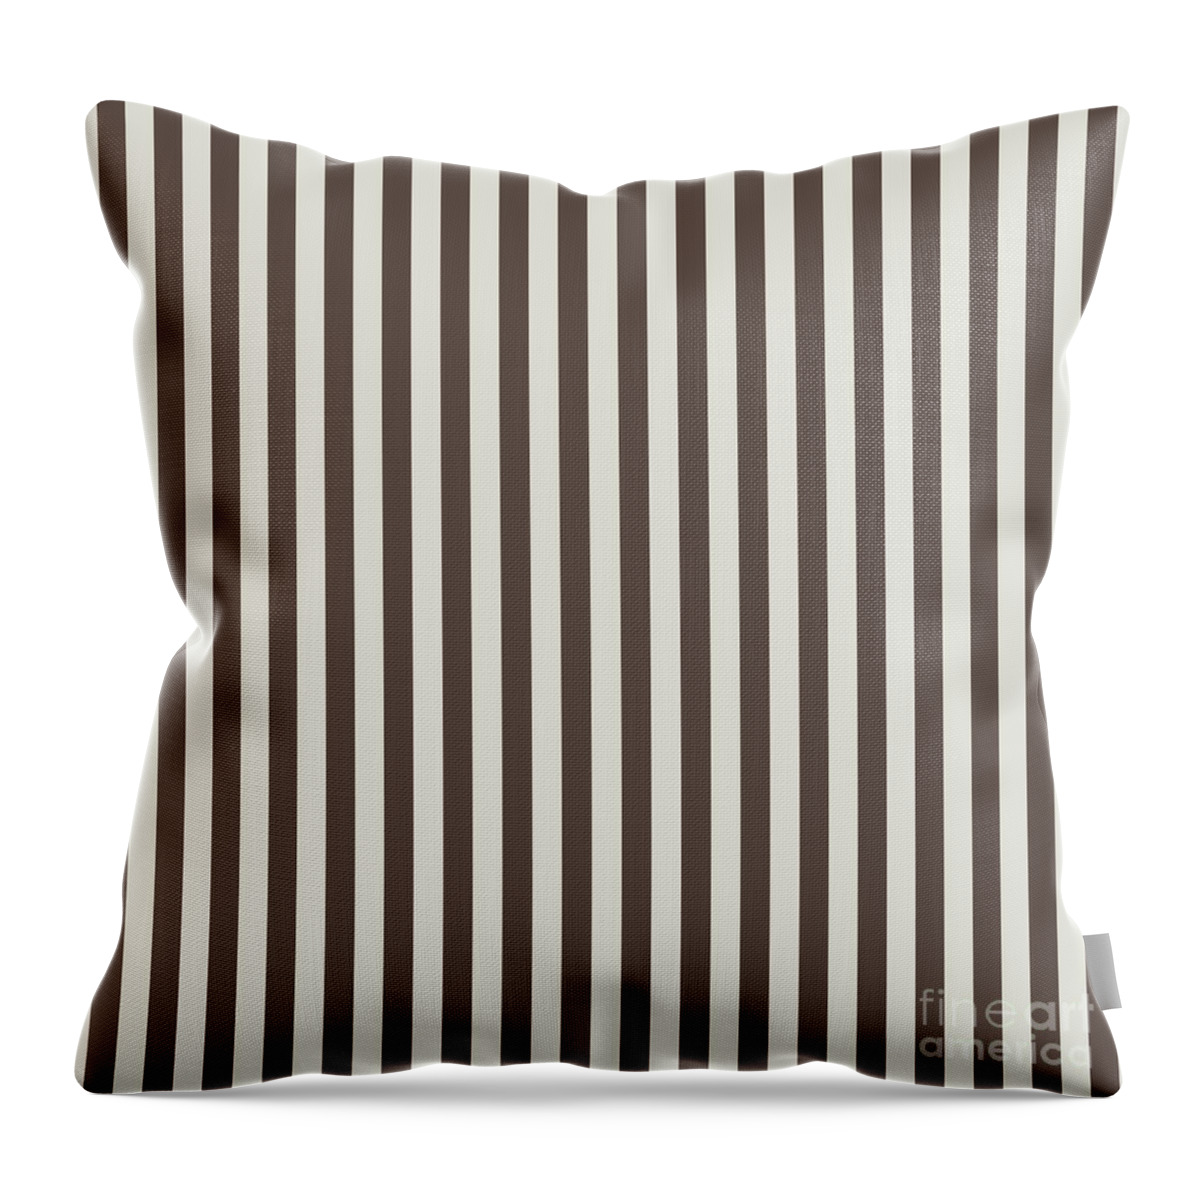 Chateau-brown Throw Pillow featuring the digital art Chateau Brown and Heron Plume Stripe by Sharon Mau